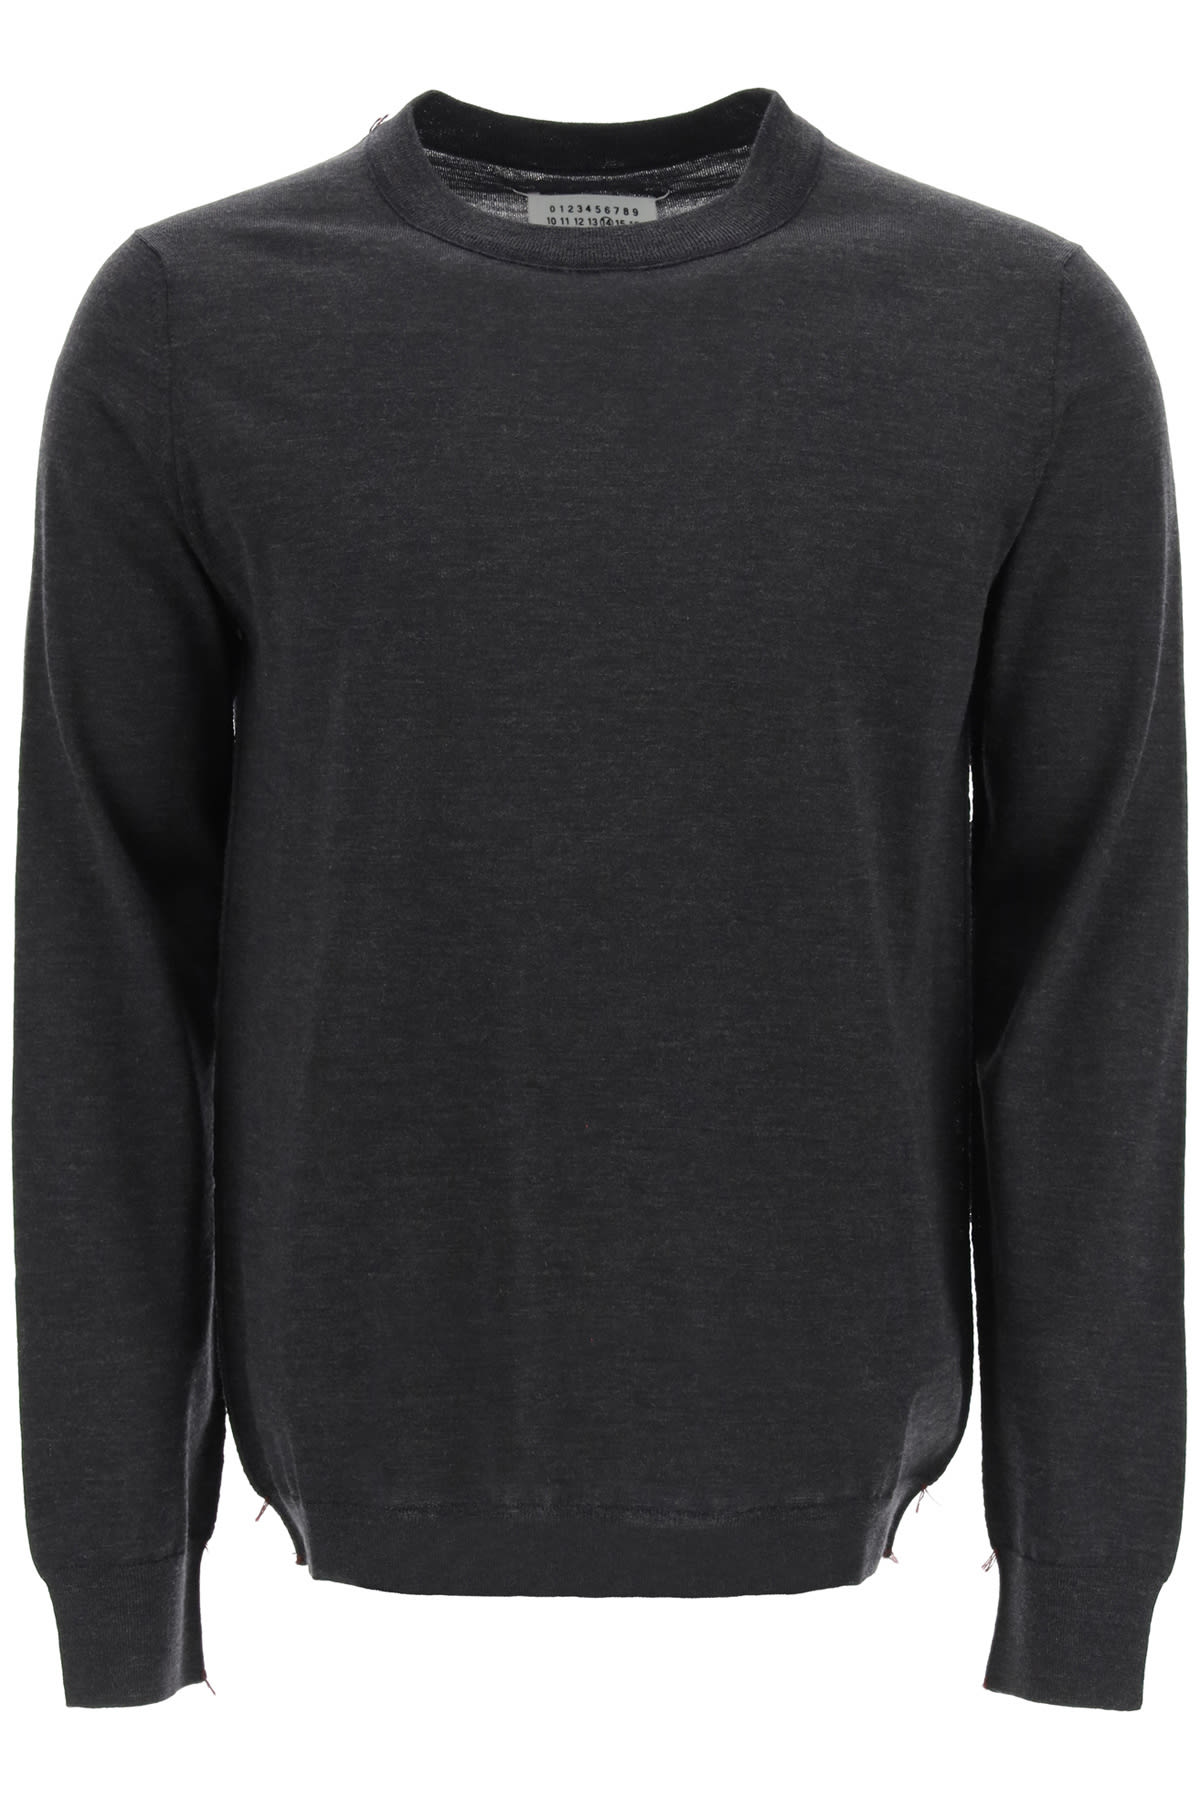 Maison Margiela Sweater With Inside-out Seams